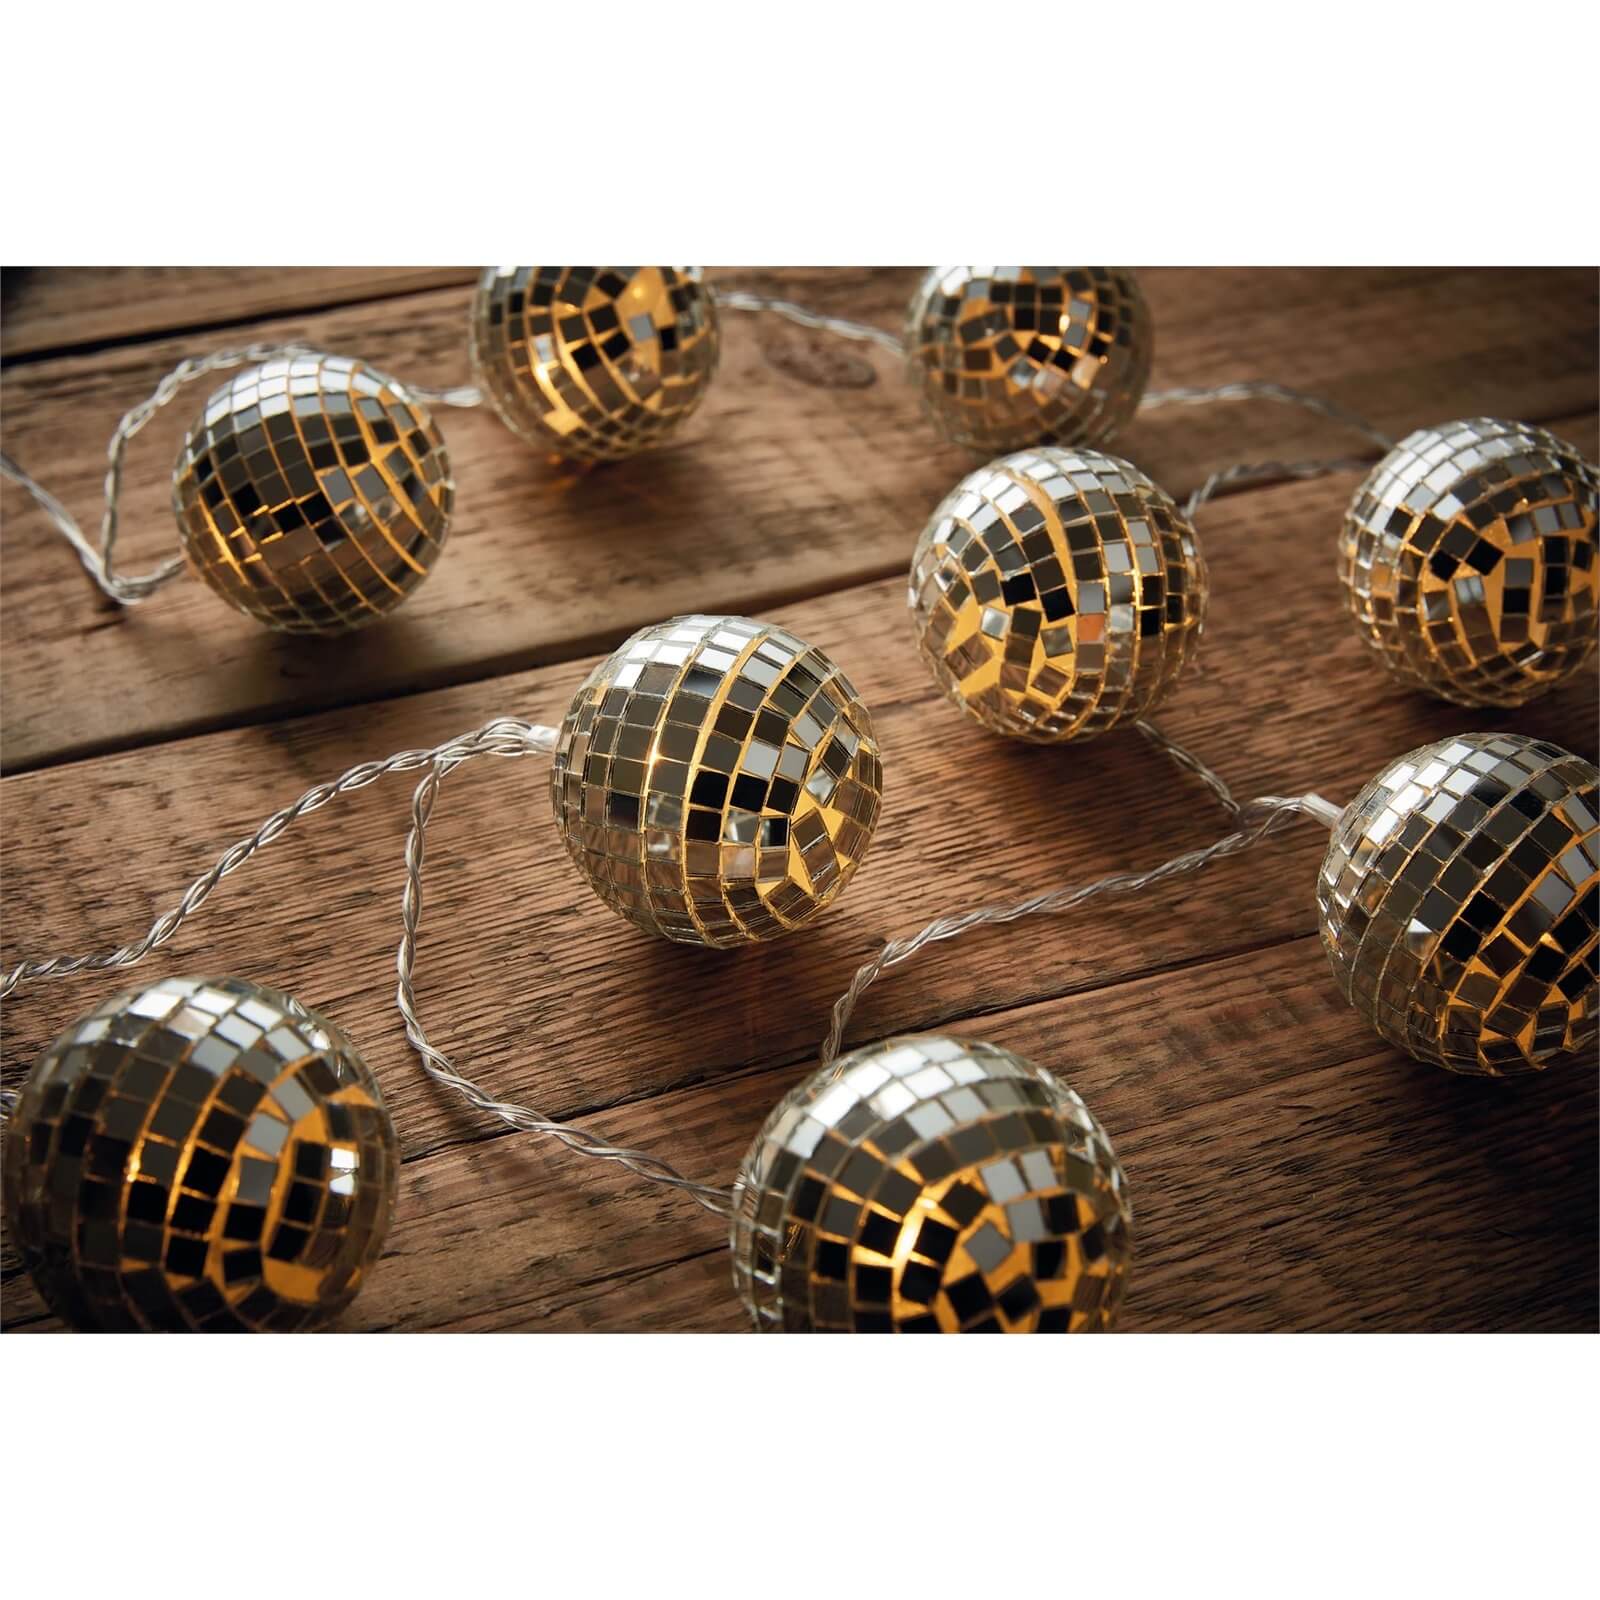 10 Disco Ball String Lights (Battery Operated)